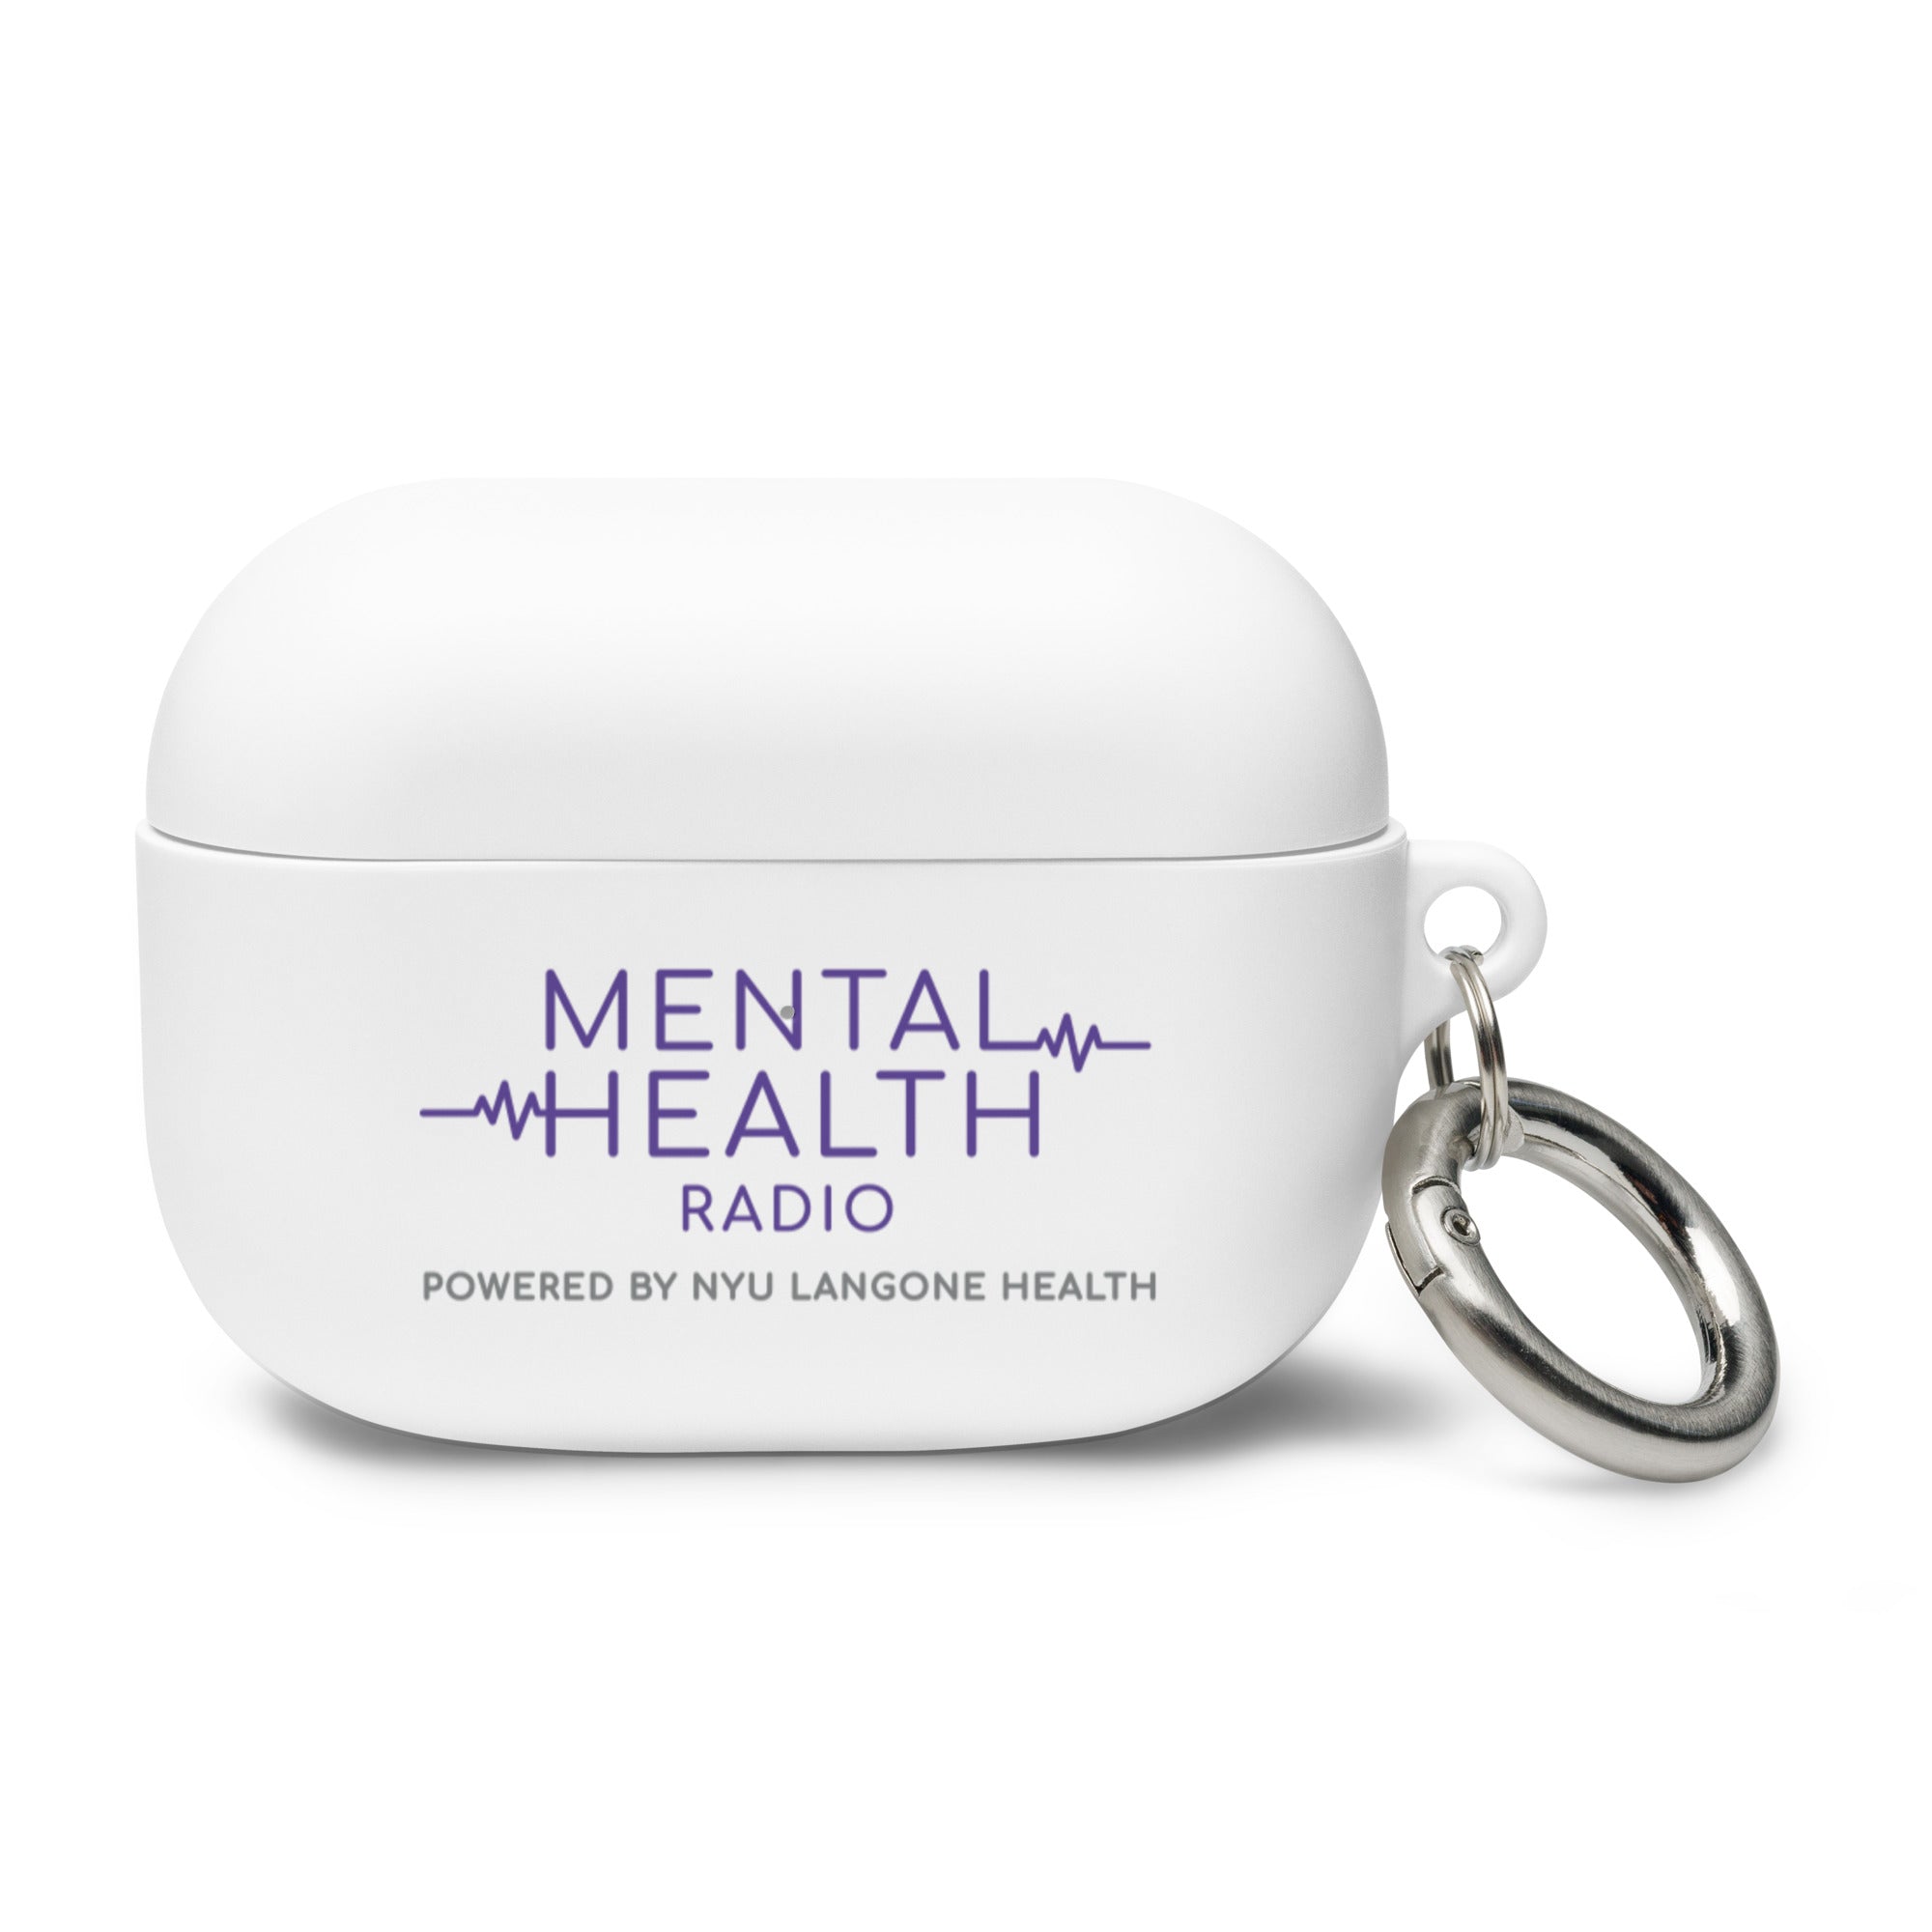 Mental Health Radio: AirPods® Case Cover